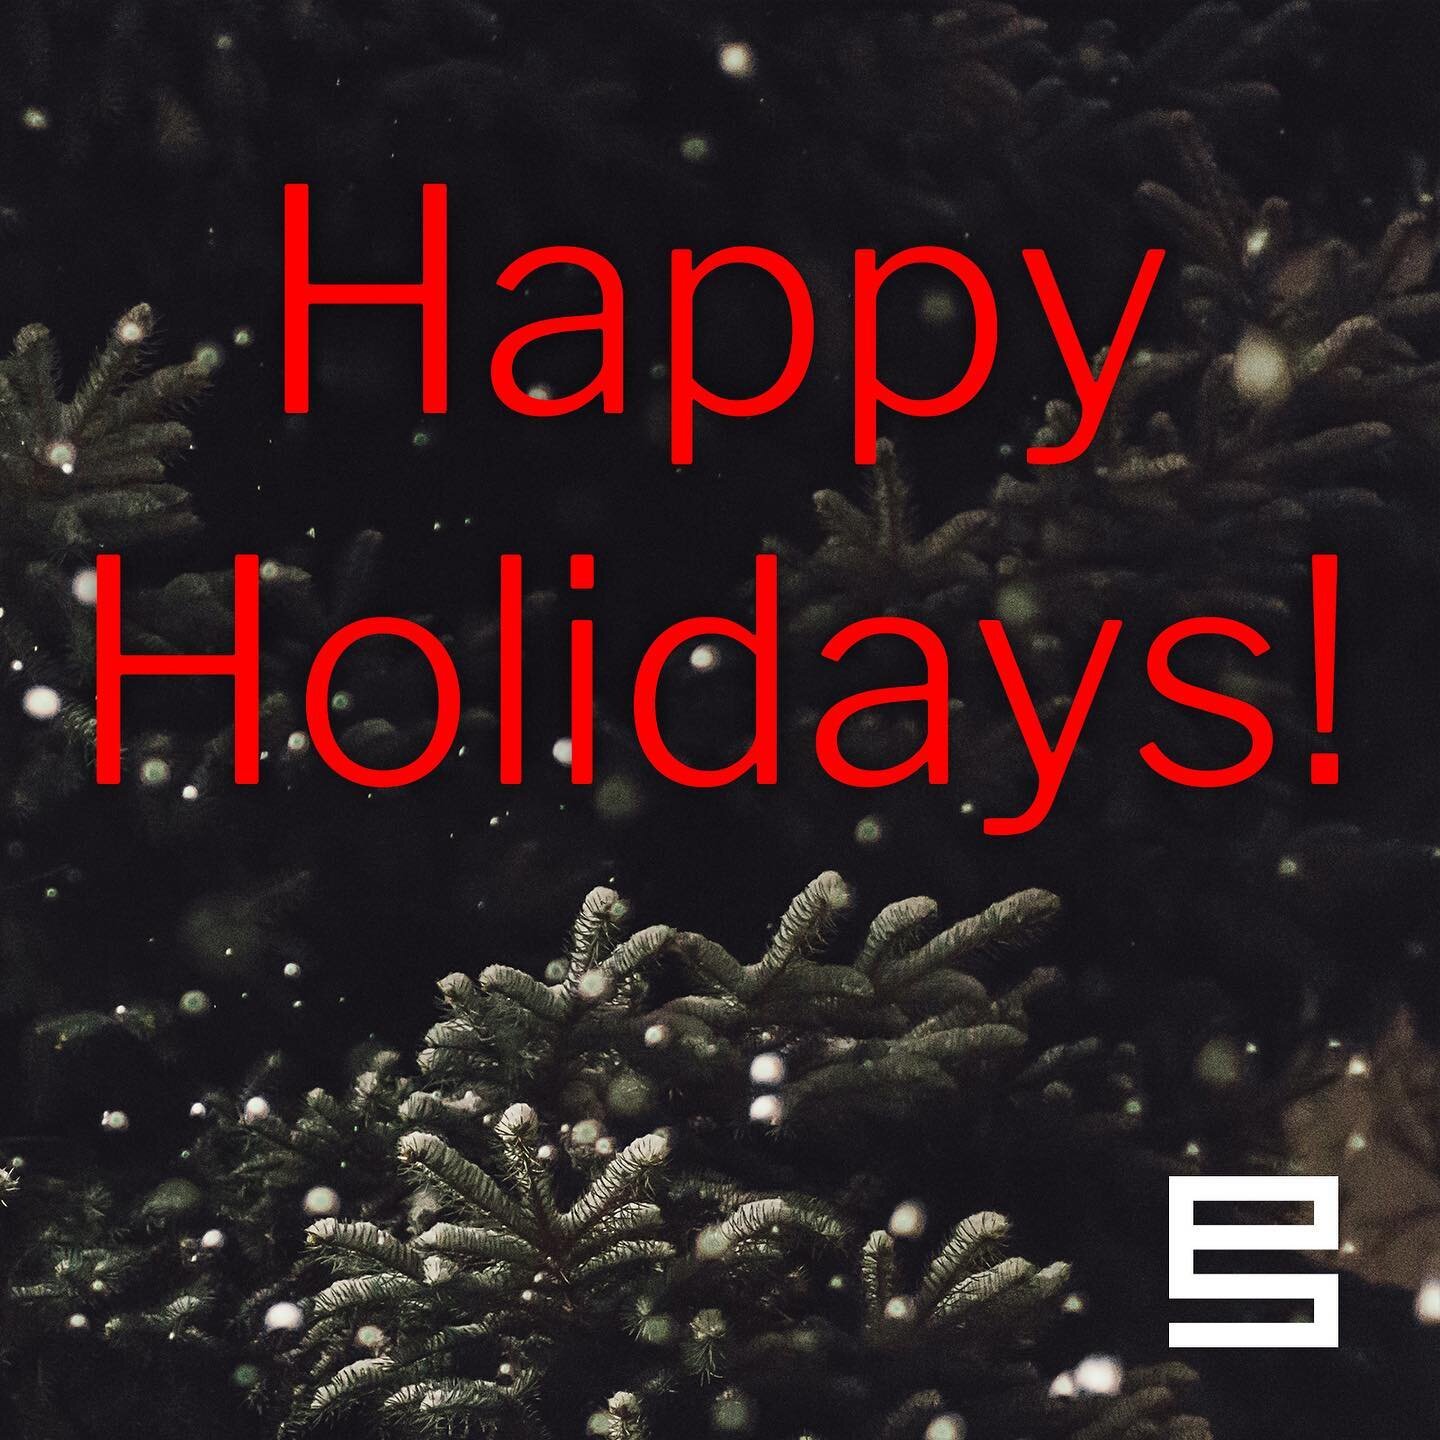 We&rsquo;d like to extend a sincere &rdquo;Happy Holidays&rdquo; to everyone! 

A busy year is almost over and it&rsquo;s time to unwind and spend time with loved ones. Safe to say this holiday is well-deserved for all of us🌲Thank you for 2022, let'